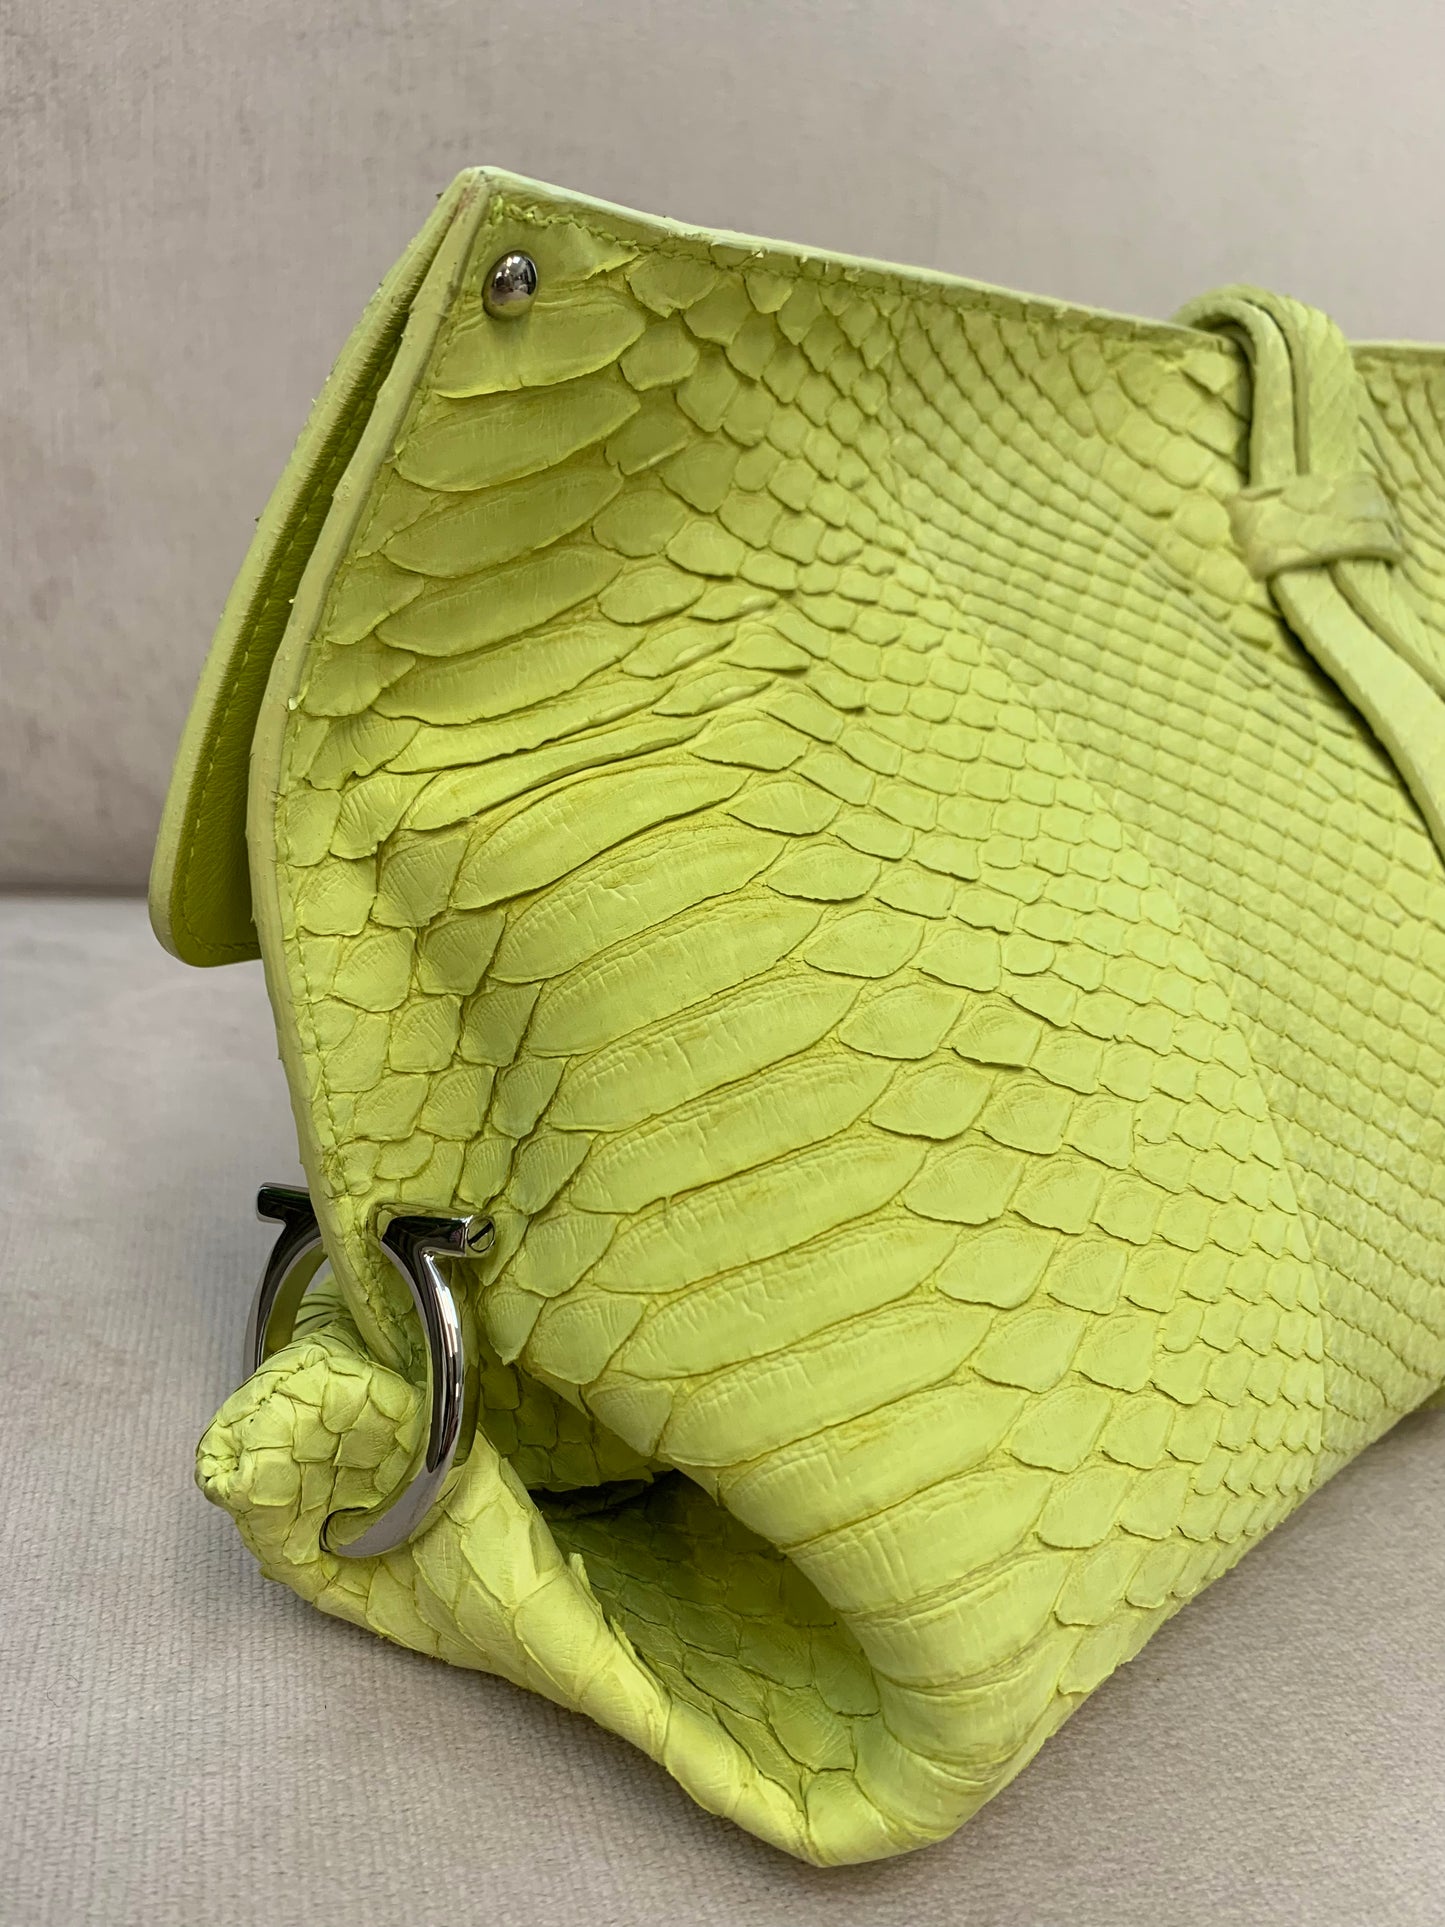 Load image into Gallery viewer, Salvatore Ferragamo Lime Snake-Print Clutch
